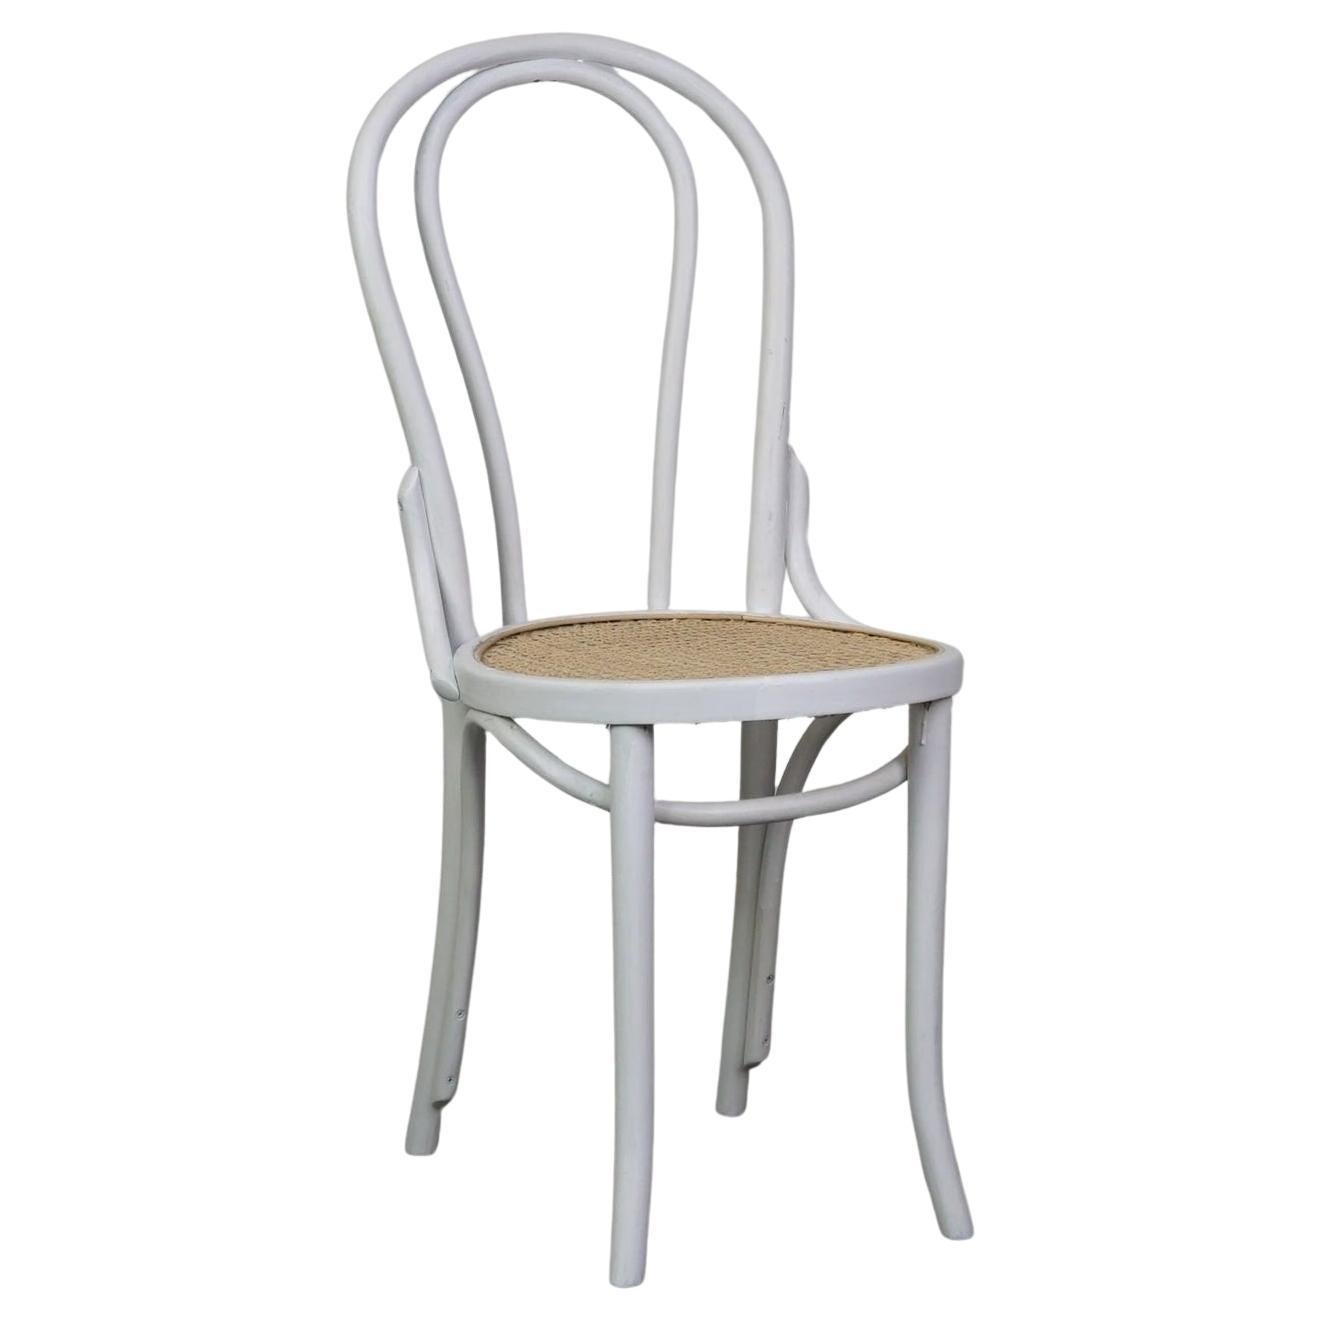 White painted original antique Thonet chair model no. 18 For Sale